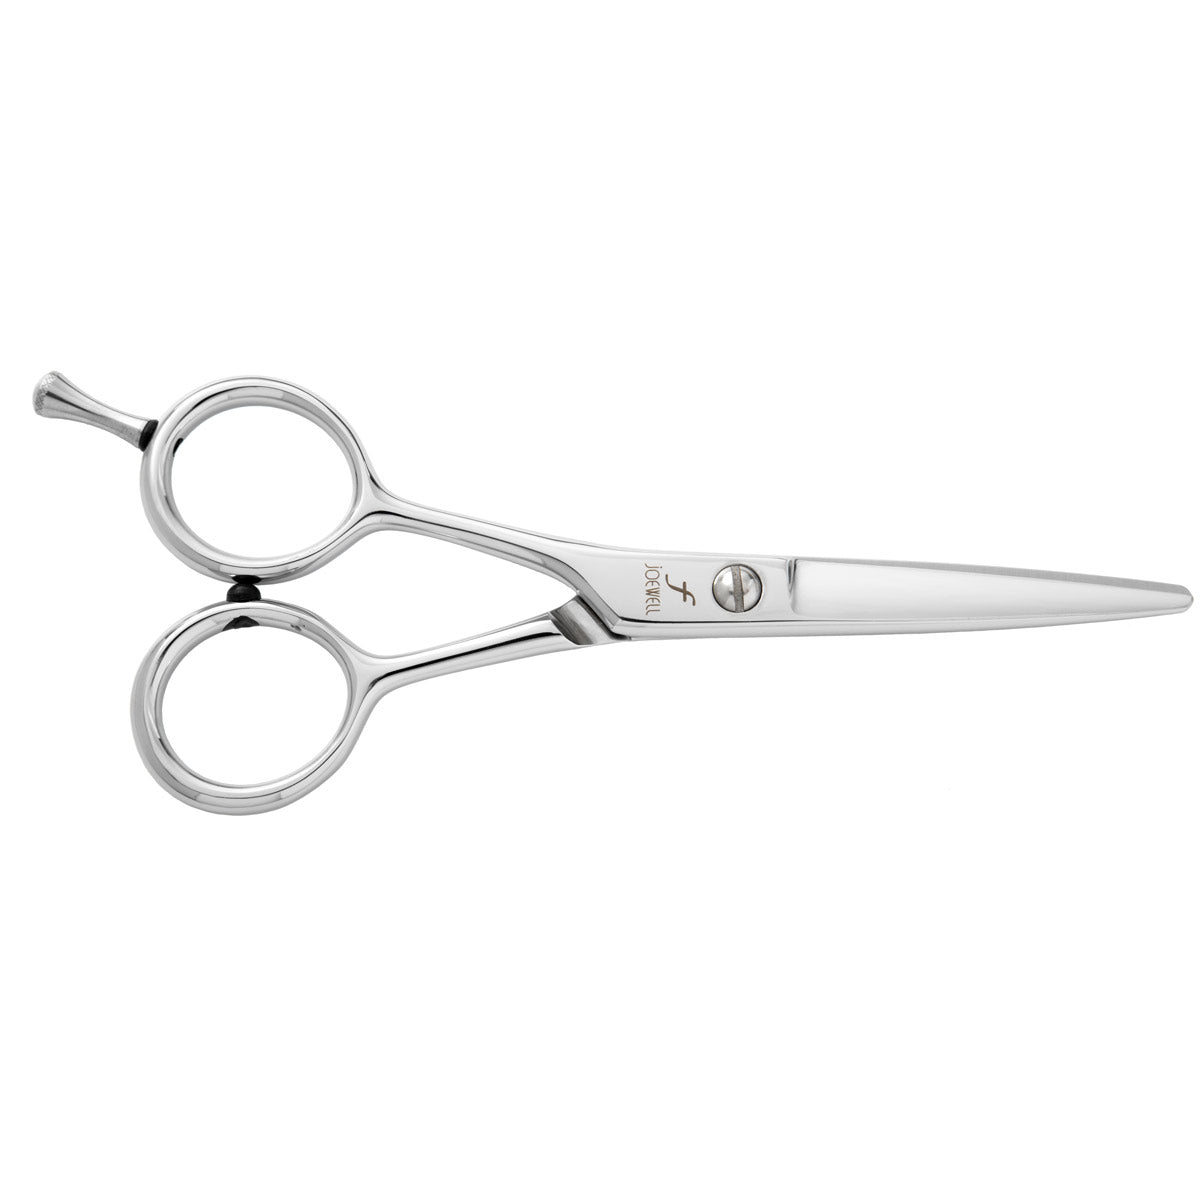 5.5 inch left handed convex blade scissors by Joewell - LC55  Ergonomic, made in Japan